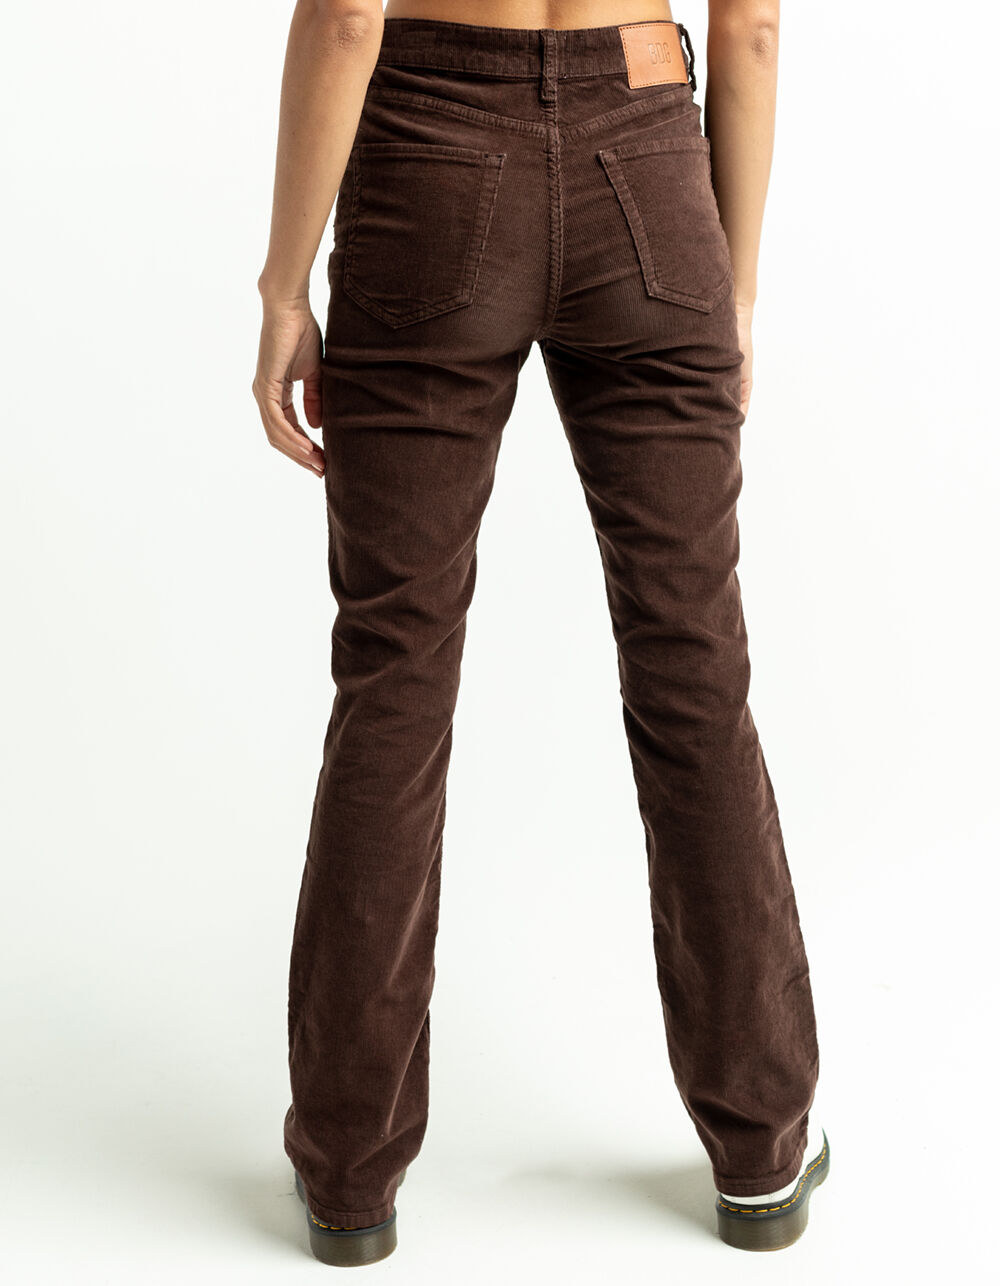 on behalf of A good friend Autonomy BDG Urban Outfitters Corduroy Womens Flare Pants - BROWN | Tillys